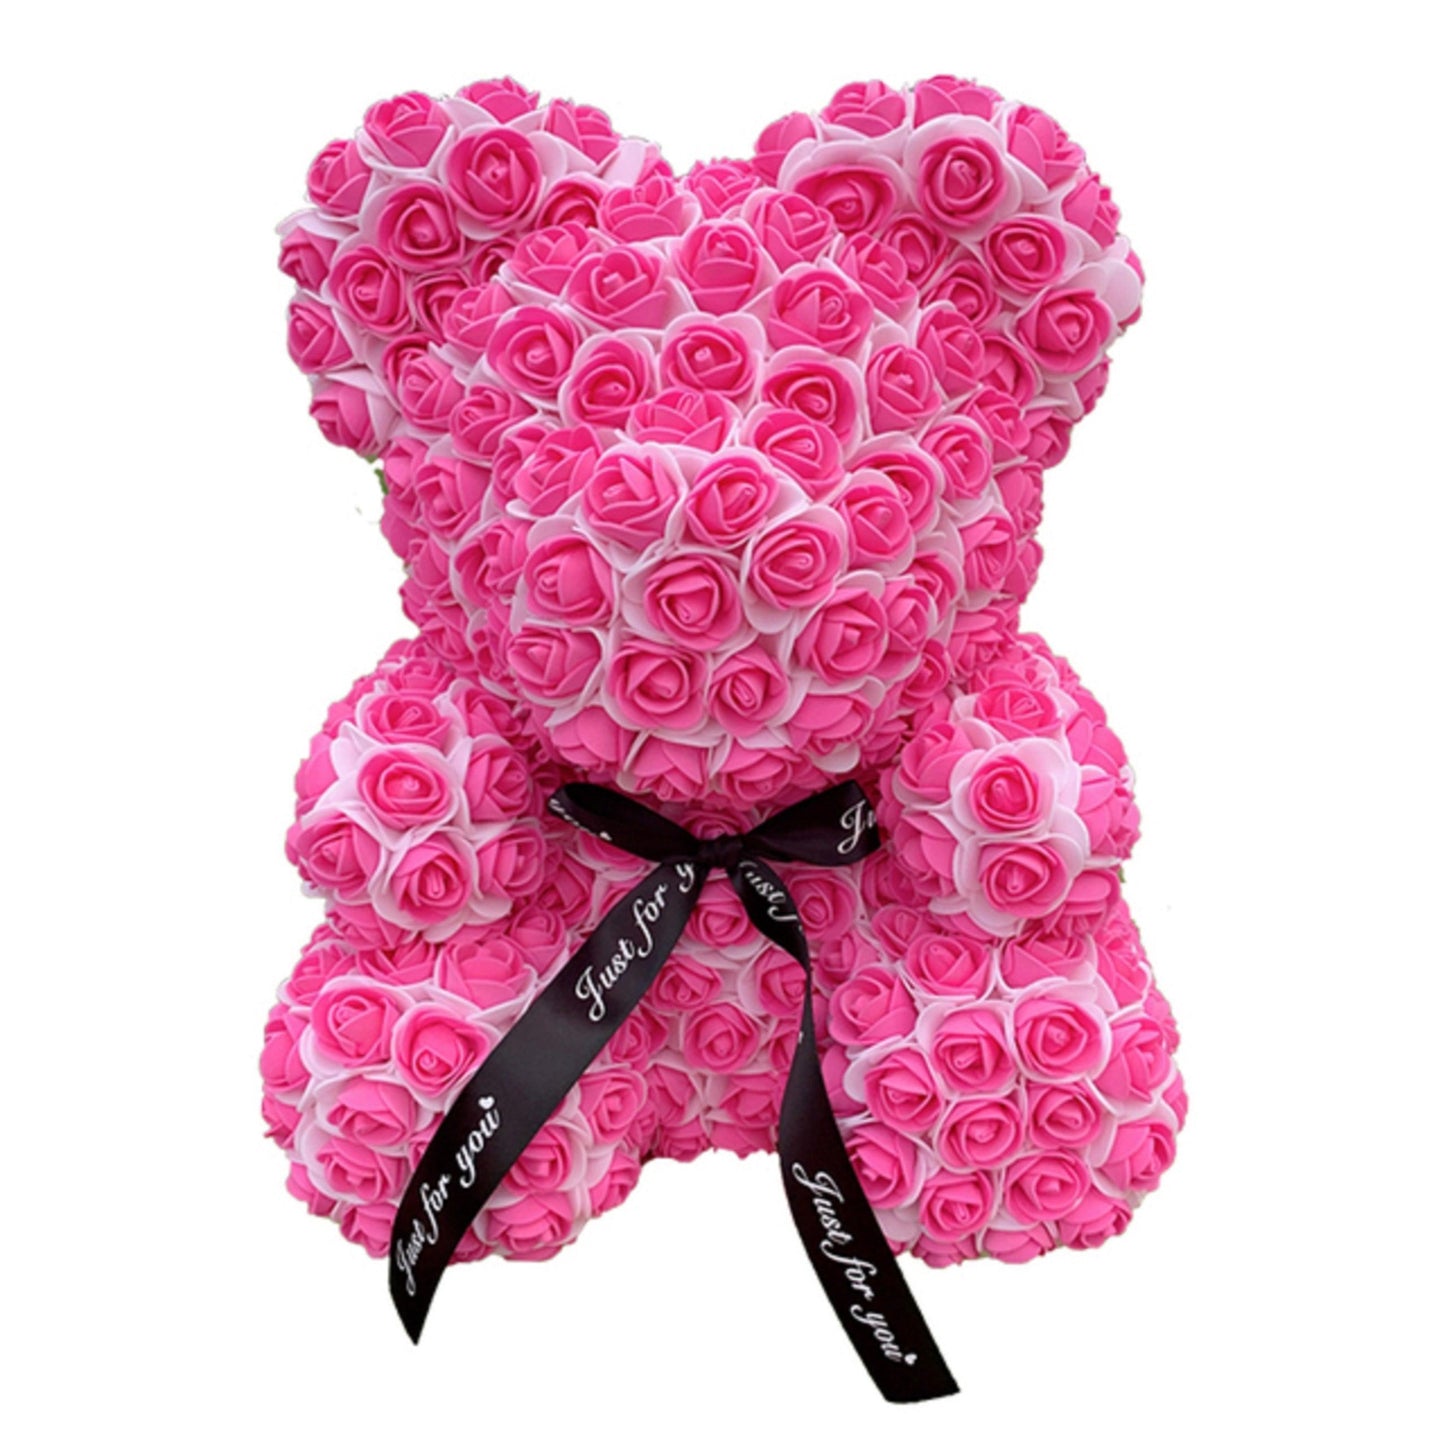 Rose Bear Gifts-NEW COLORS - Twin Chronicles 